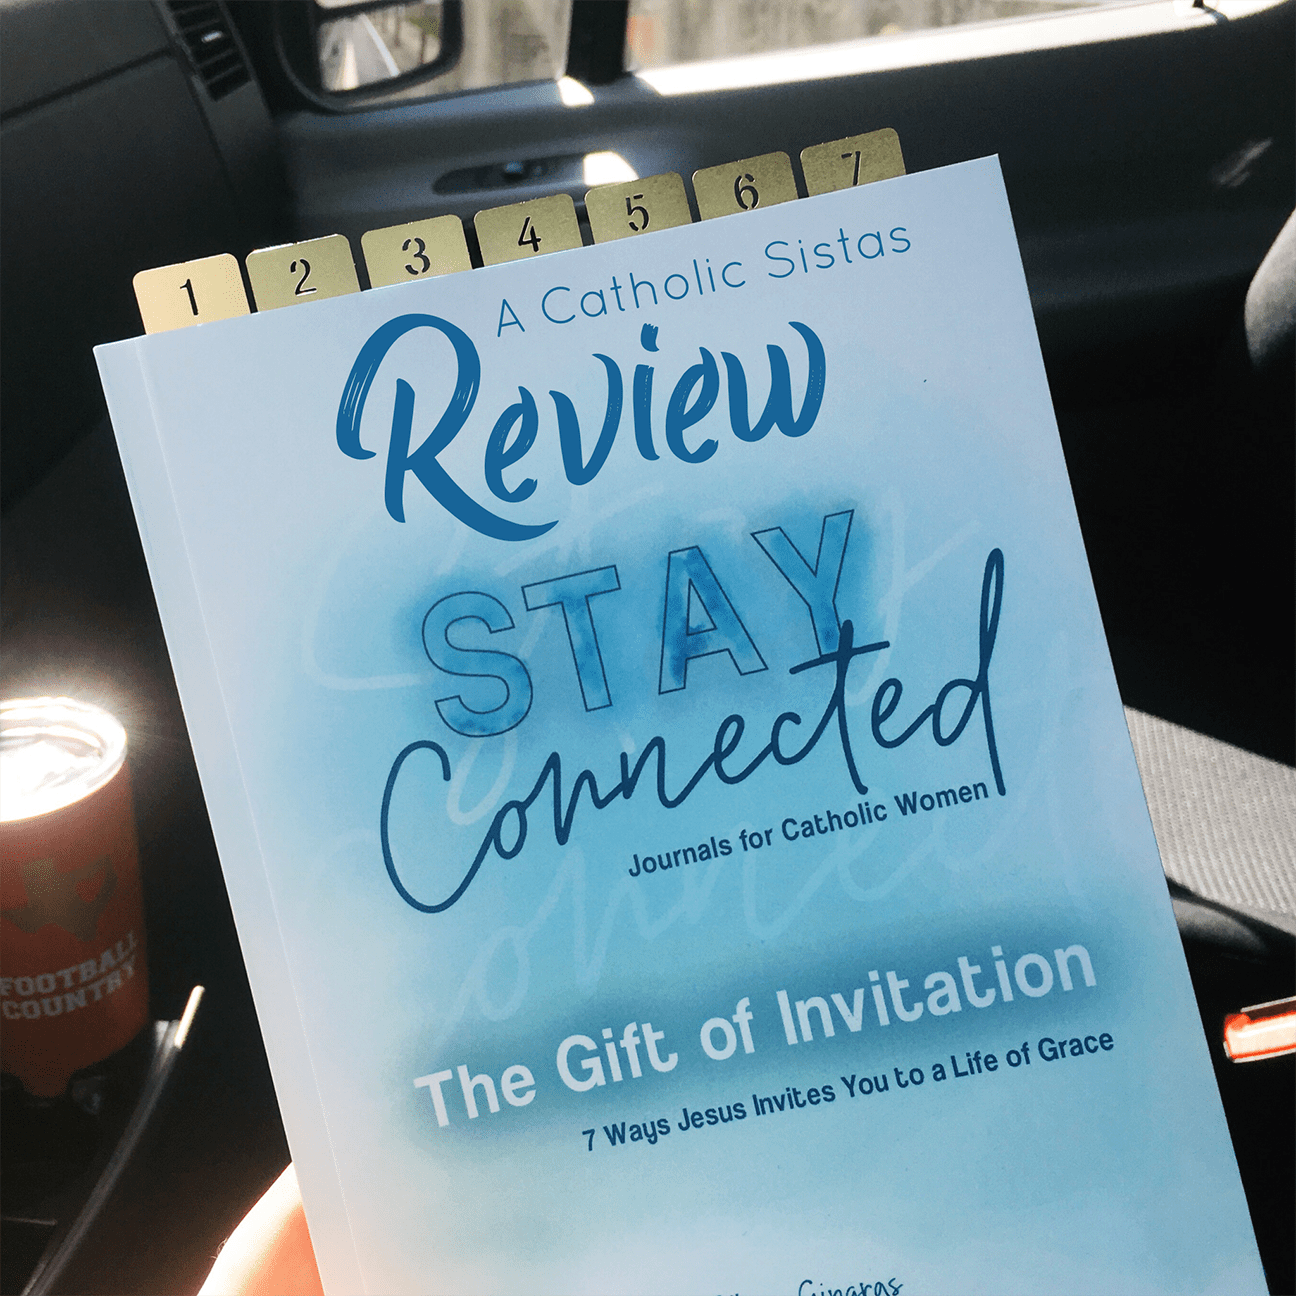 A Catholic Sistas Review:Stay Connected